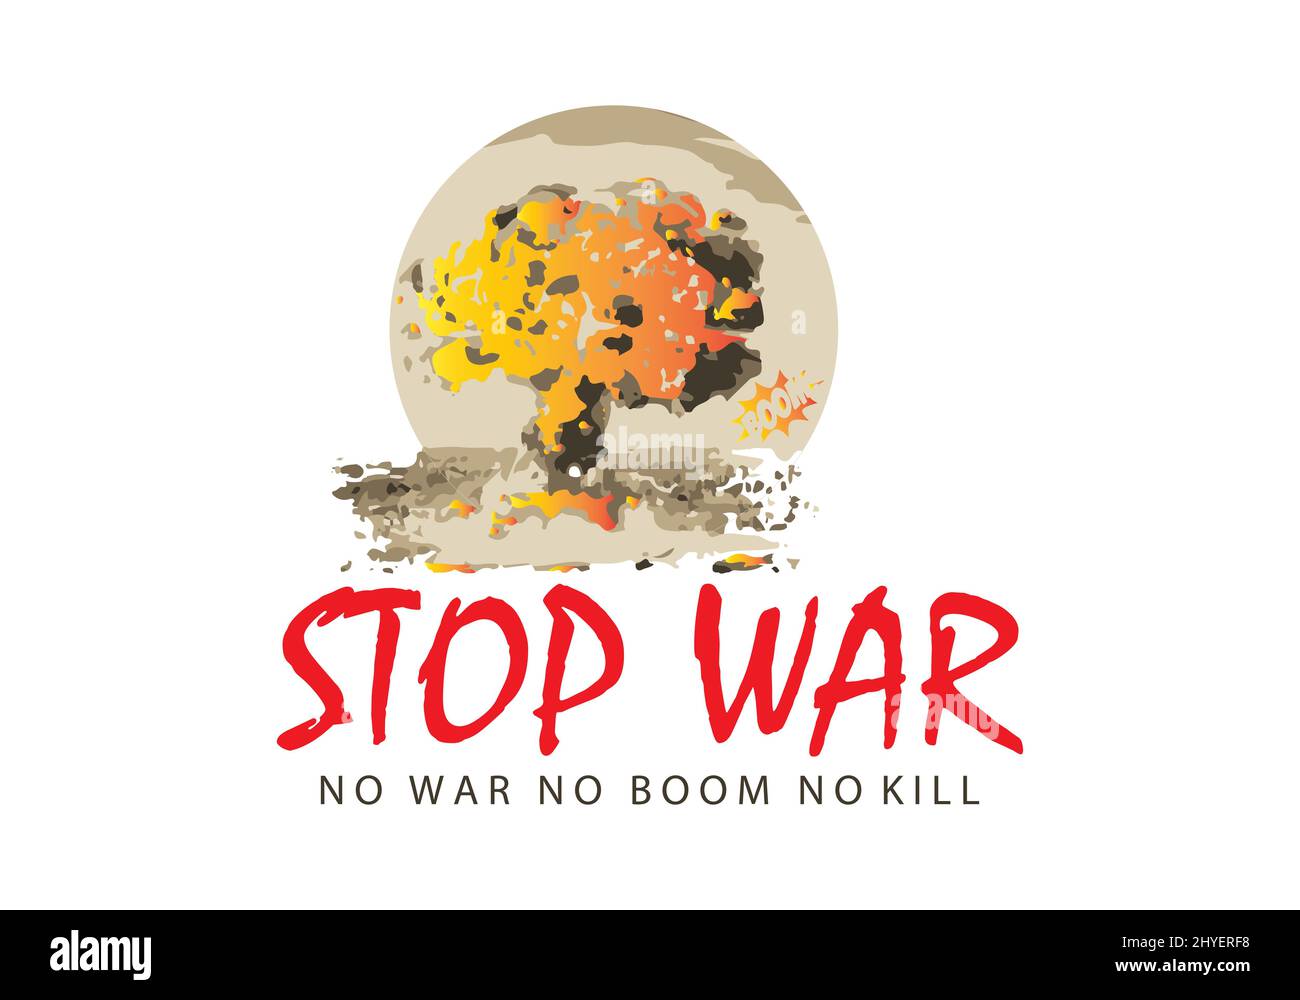 Stop War. Save people and save the world. Stop the world war. No BOOM and no more war. Stop killing and save people of the world. war and boom poster Stock Vector